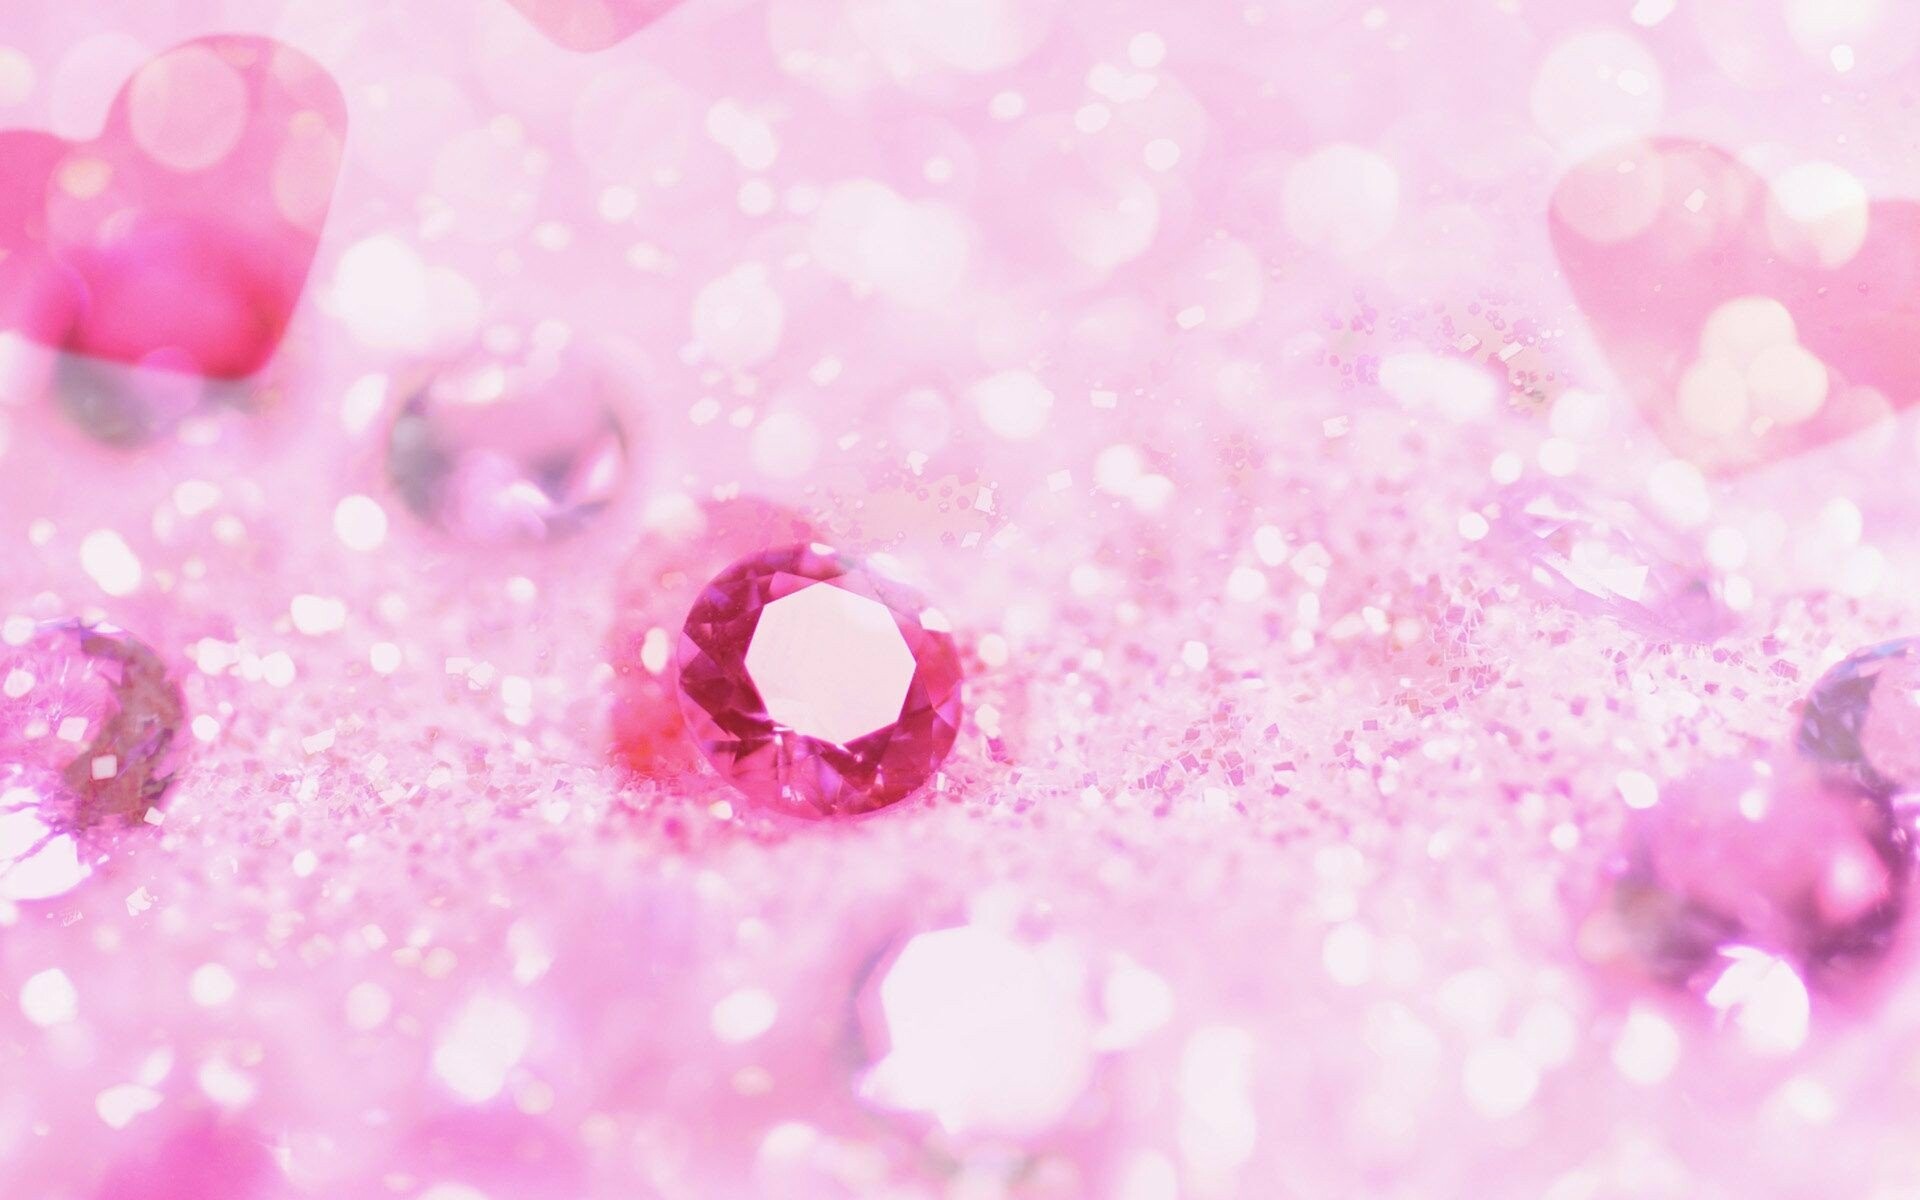 Jewels: Shiny gemstones, Valued for their immense rarity. 1920x1200 HD Wallpaper.